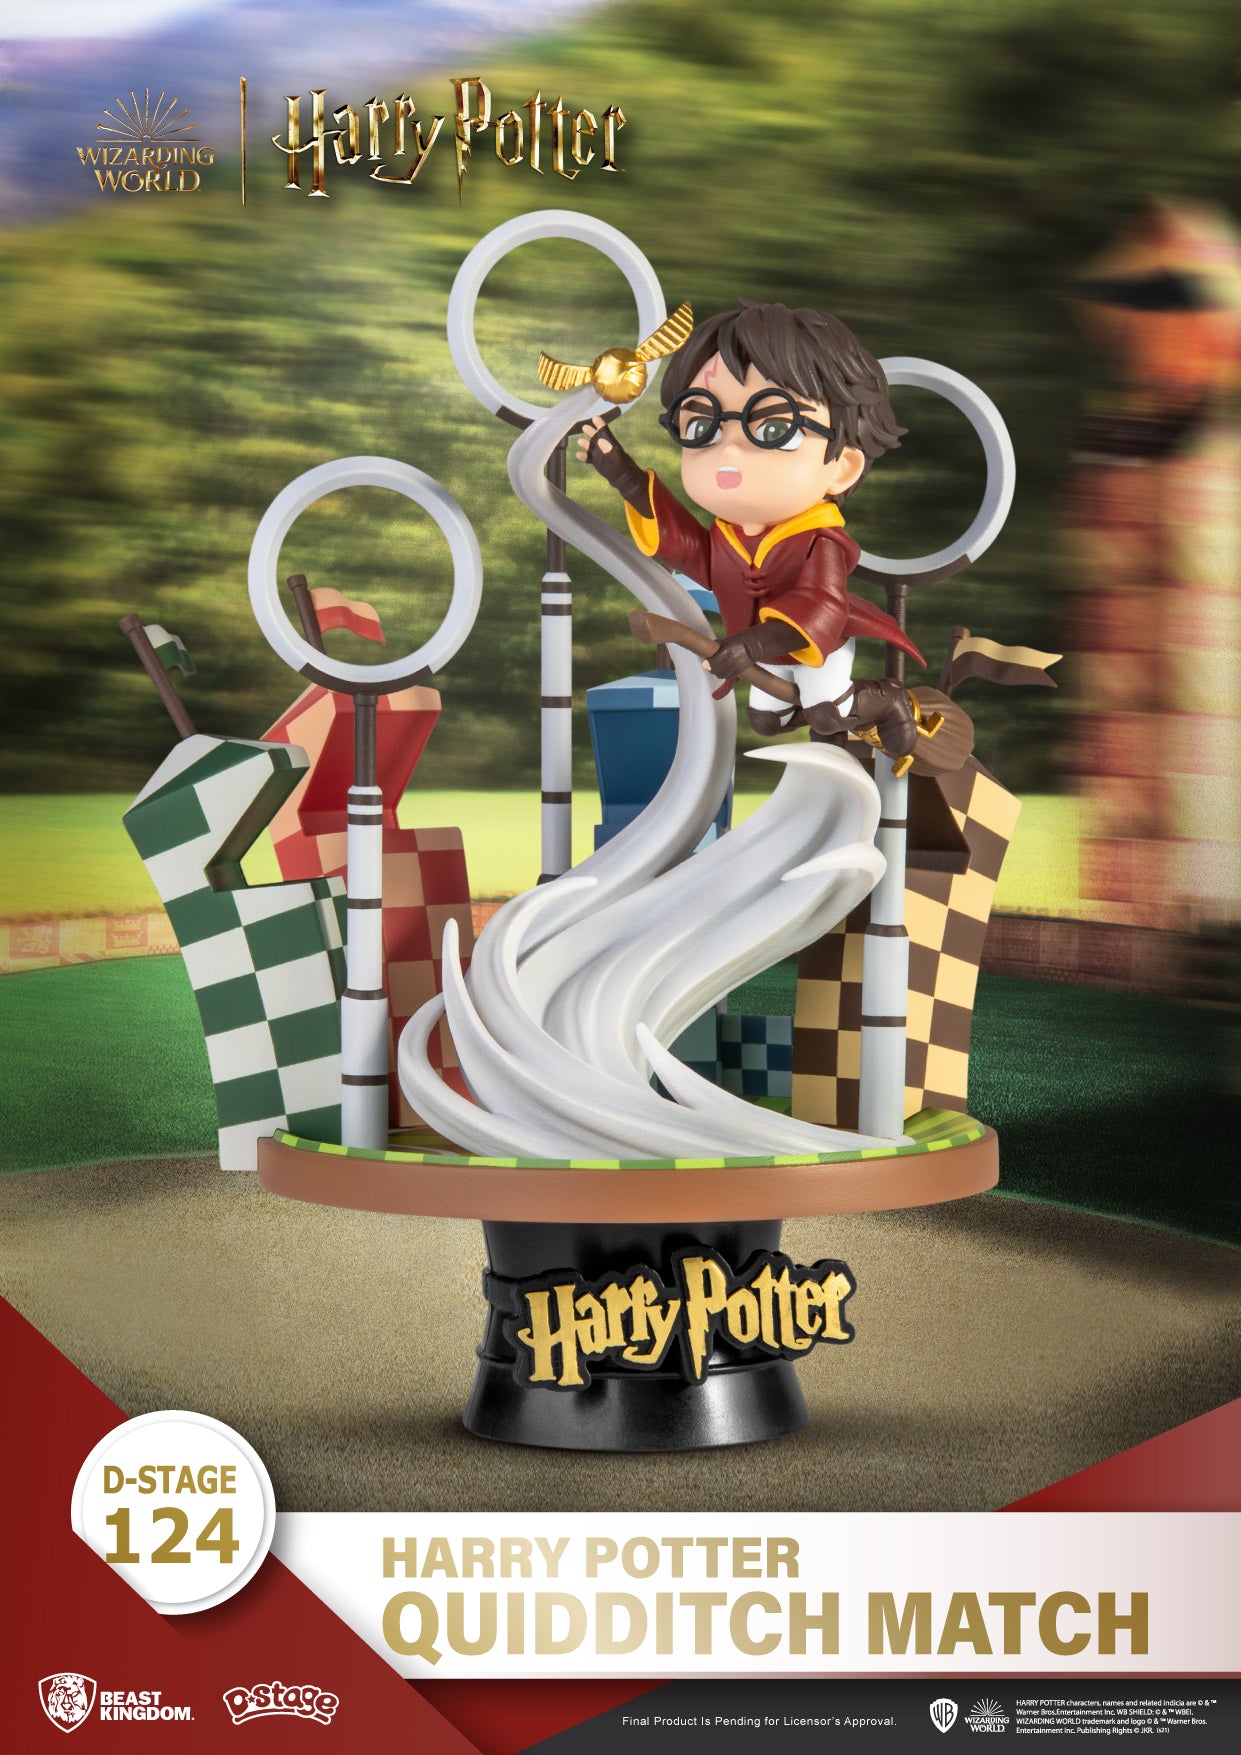 Beast Kingdom DS-124 Harry Potter-Quidditch Match Diorama Stage D-Stage Figure Statue